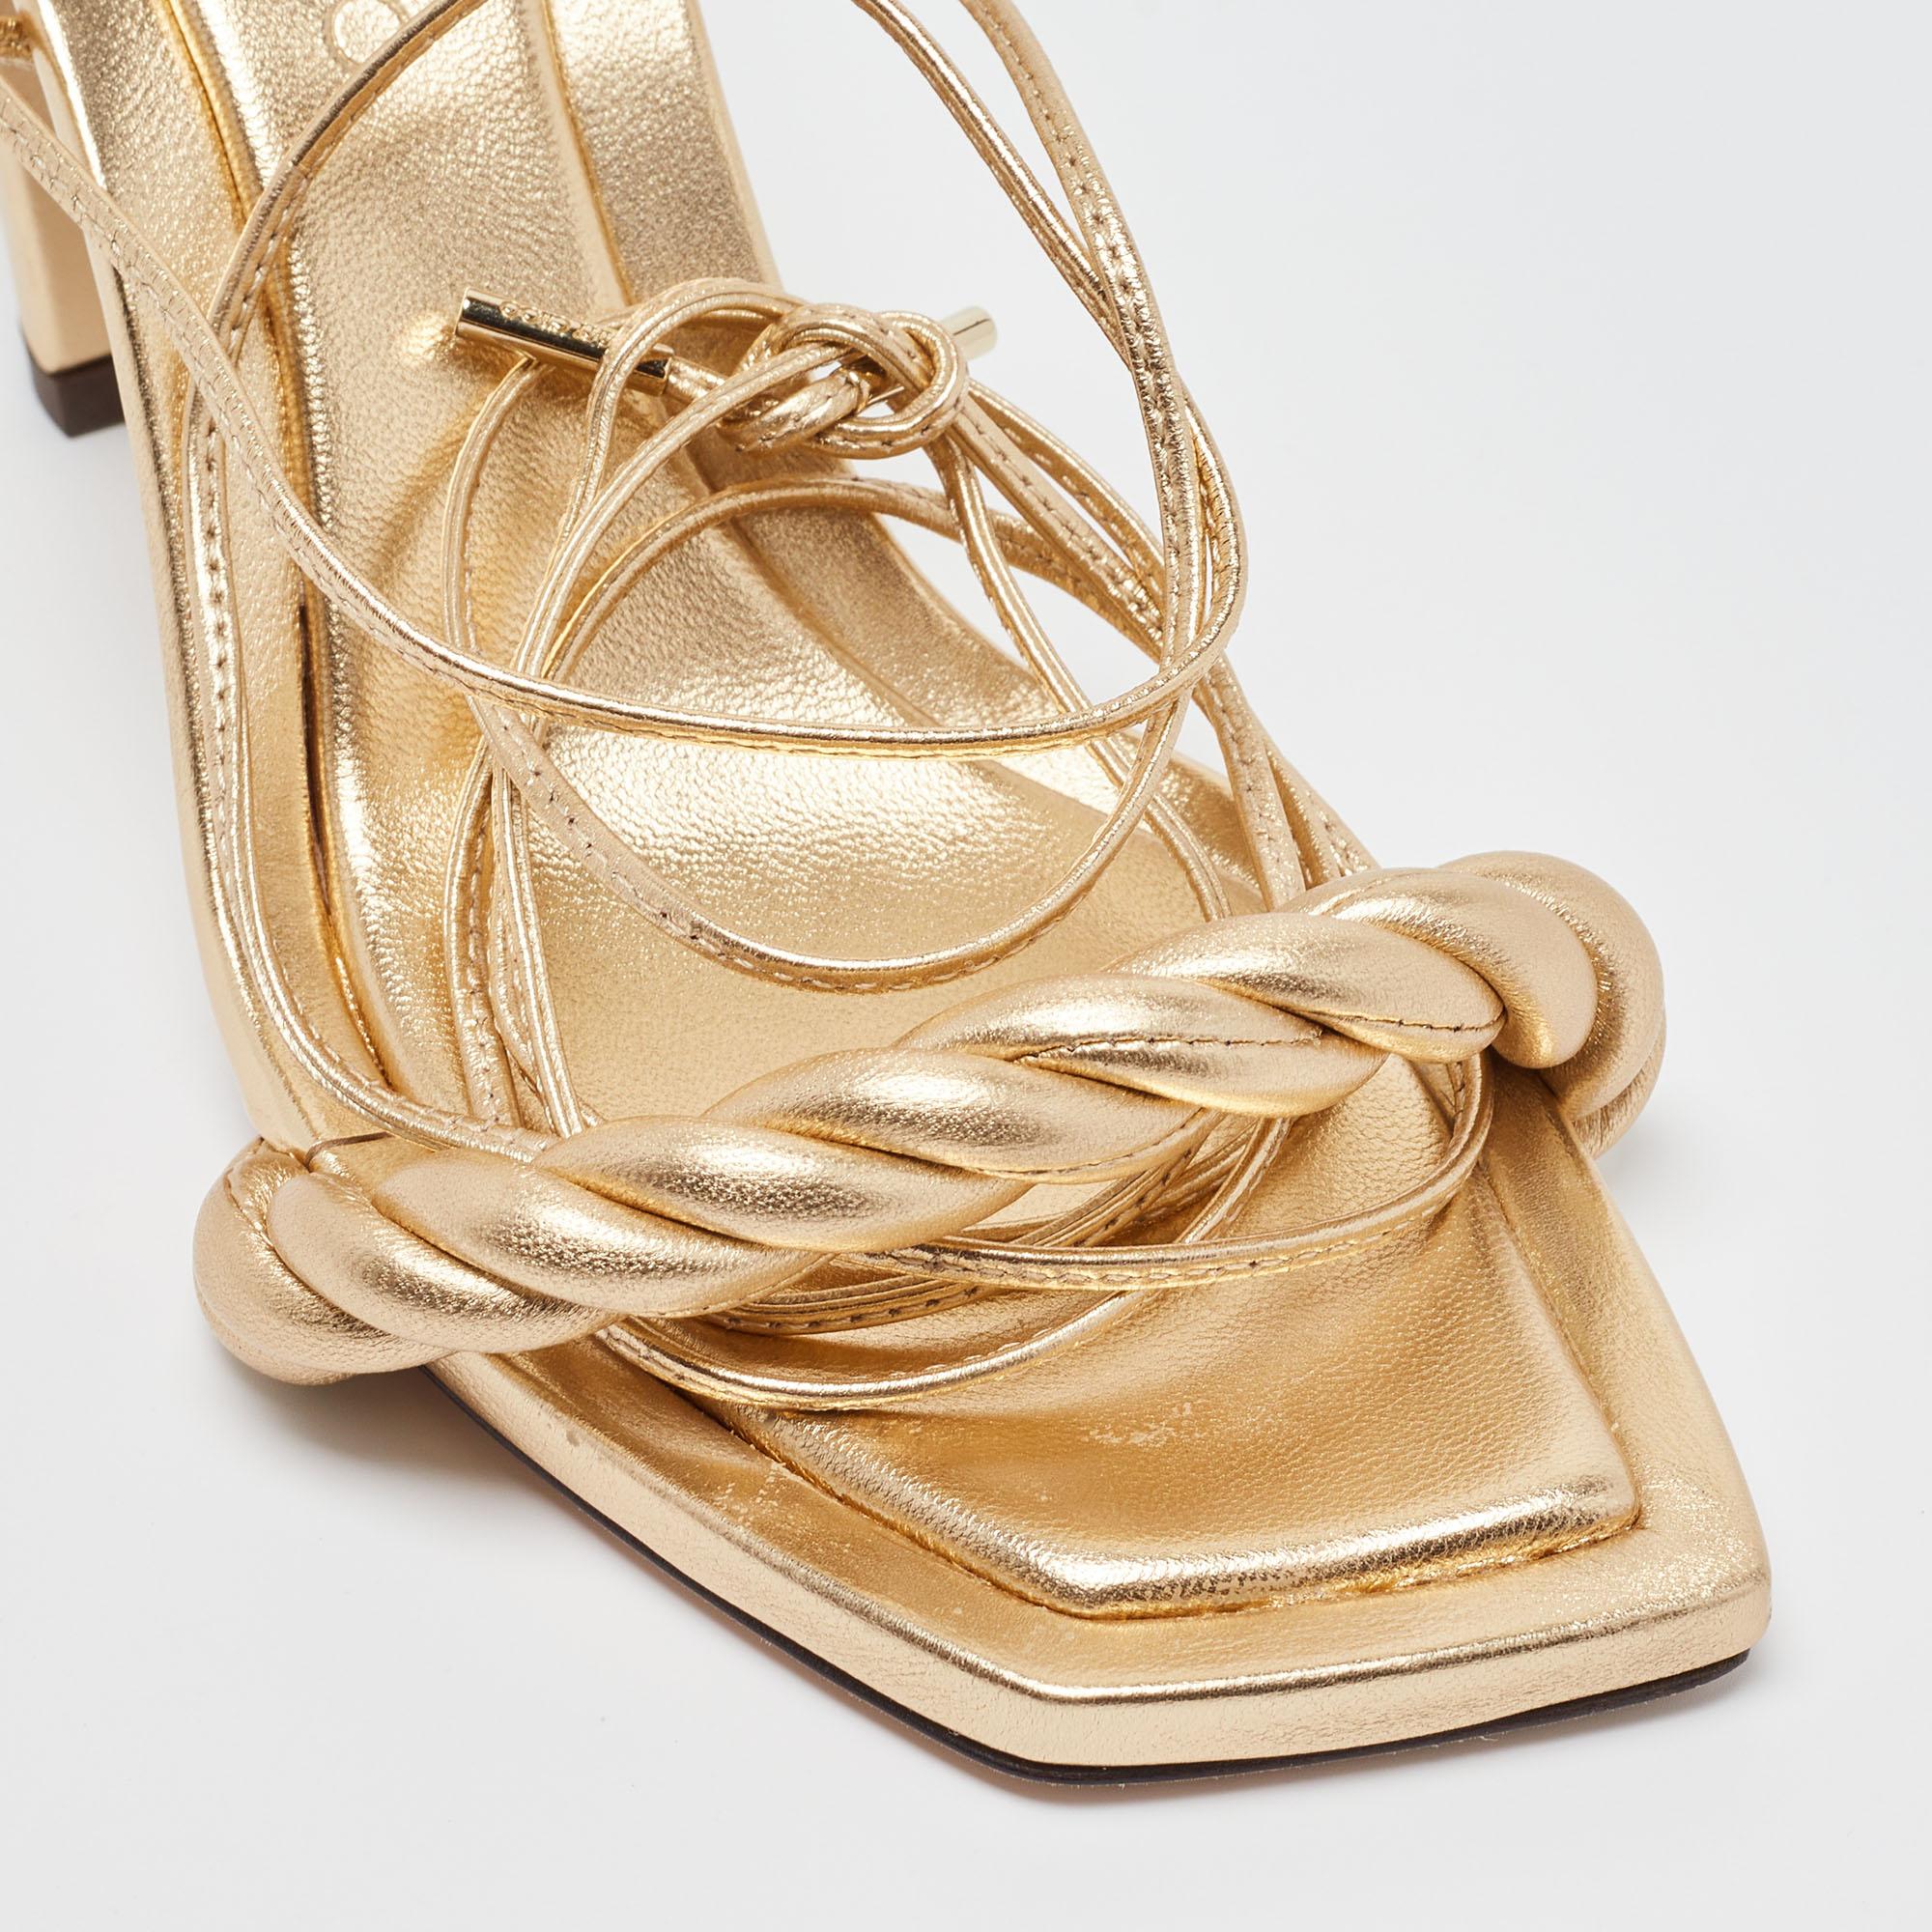 Jimmy Choo Metallic Gold Leather Diosa Twisted Slide Sandals Size 37 For Sale 1